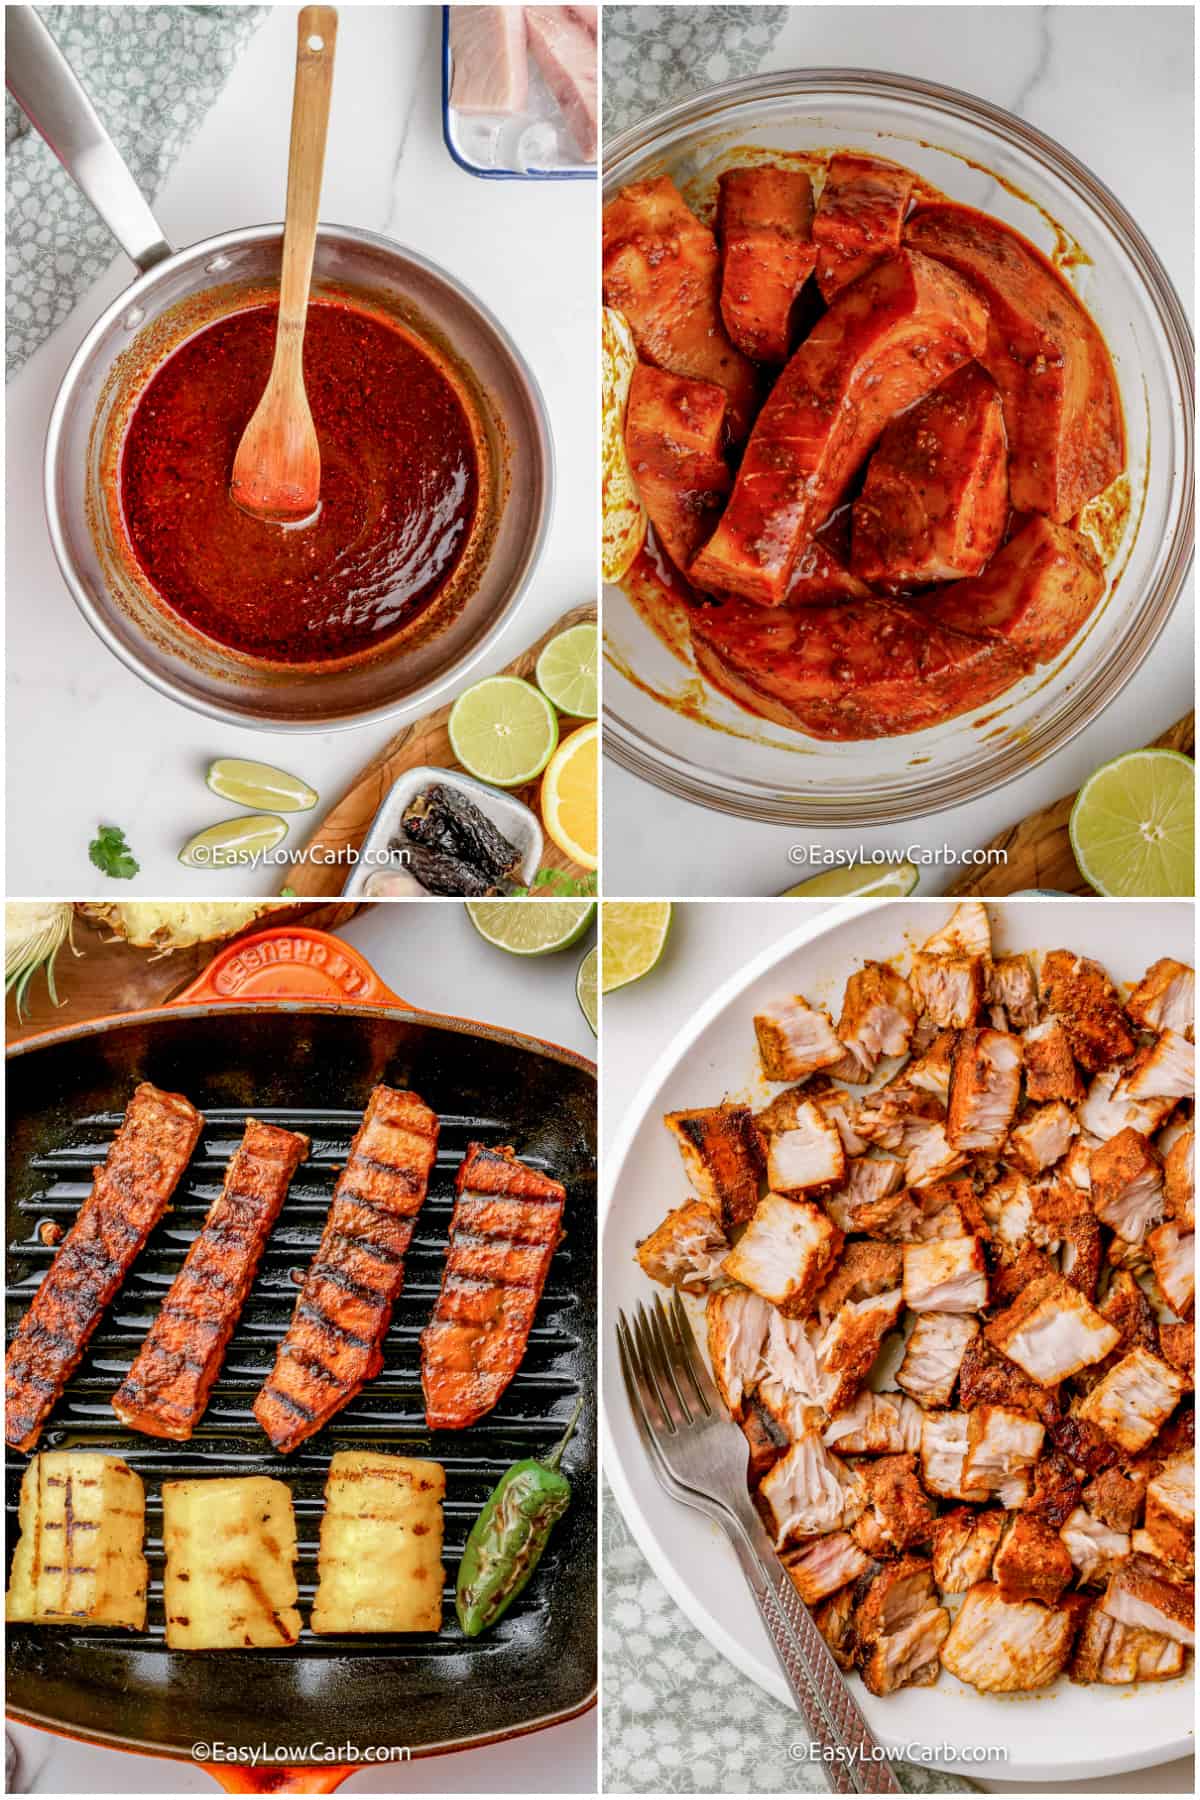 process of marinating and cooking fish for Grilled Fish Tacos